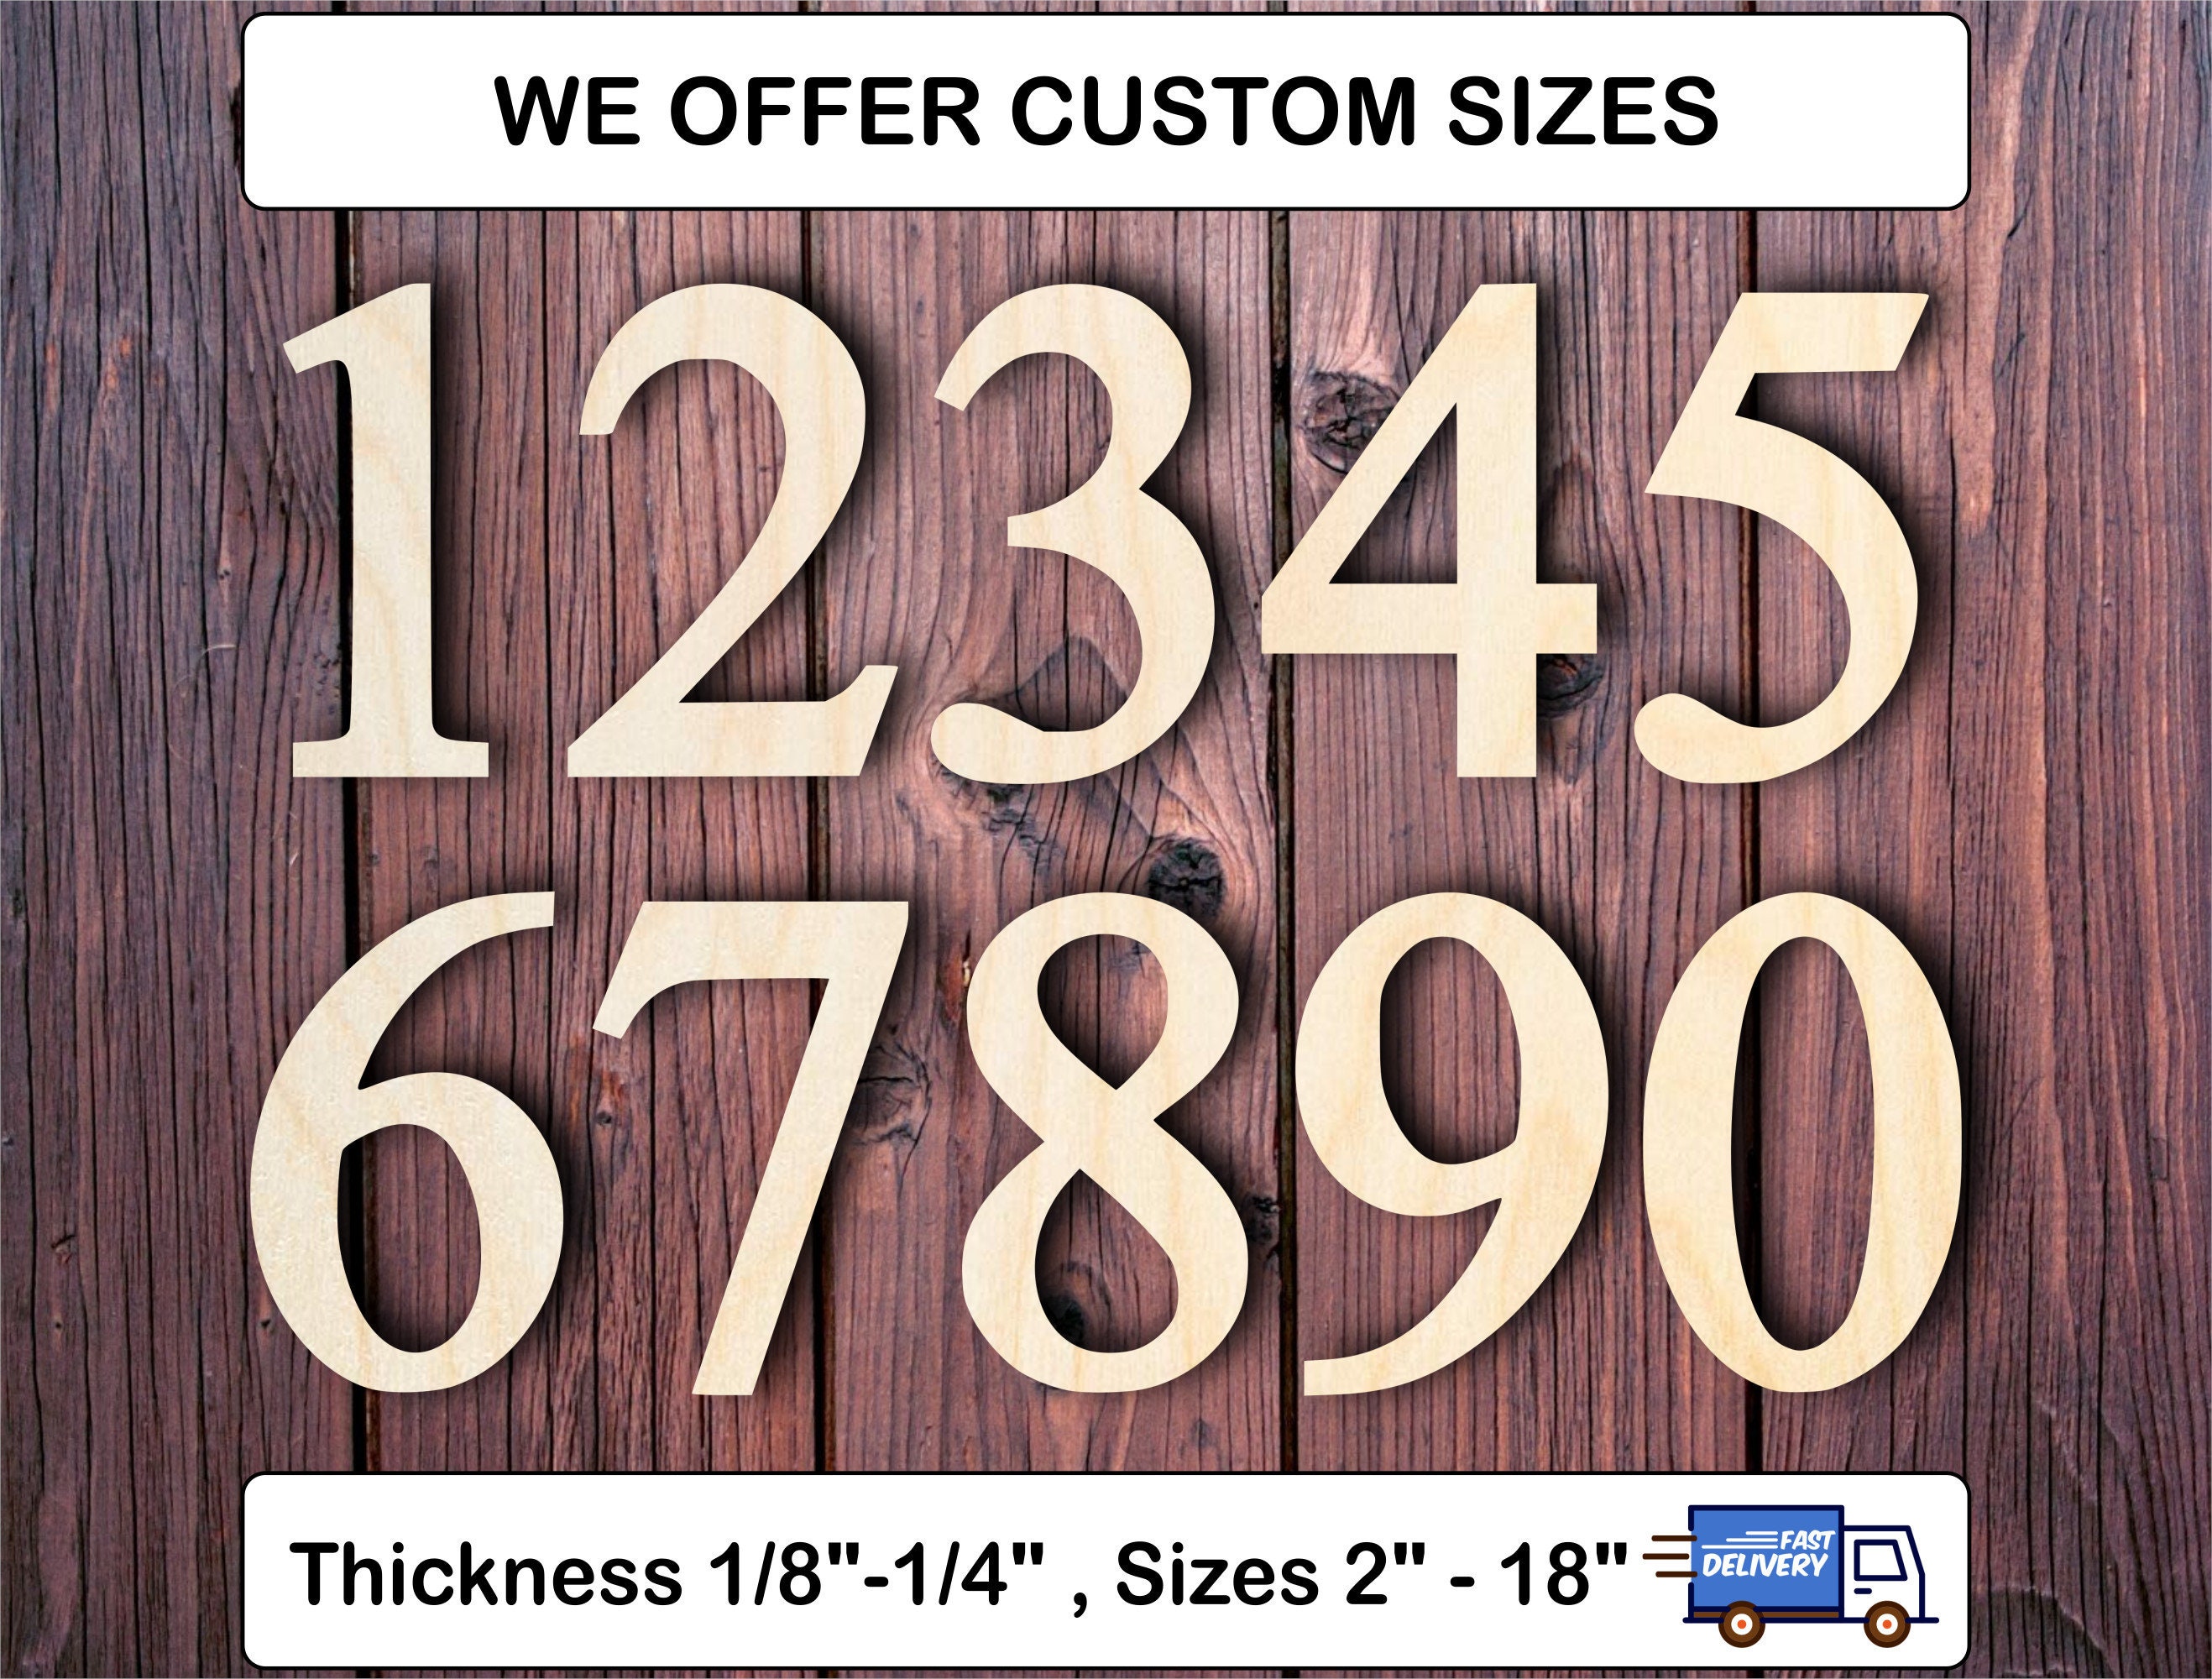 Wooden number one and matching 1/2 set. Free-standing distressed white -  Wirginta Creations